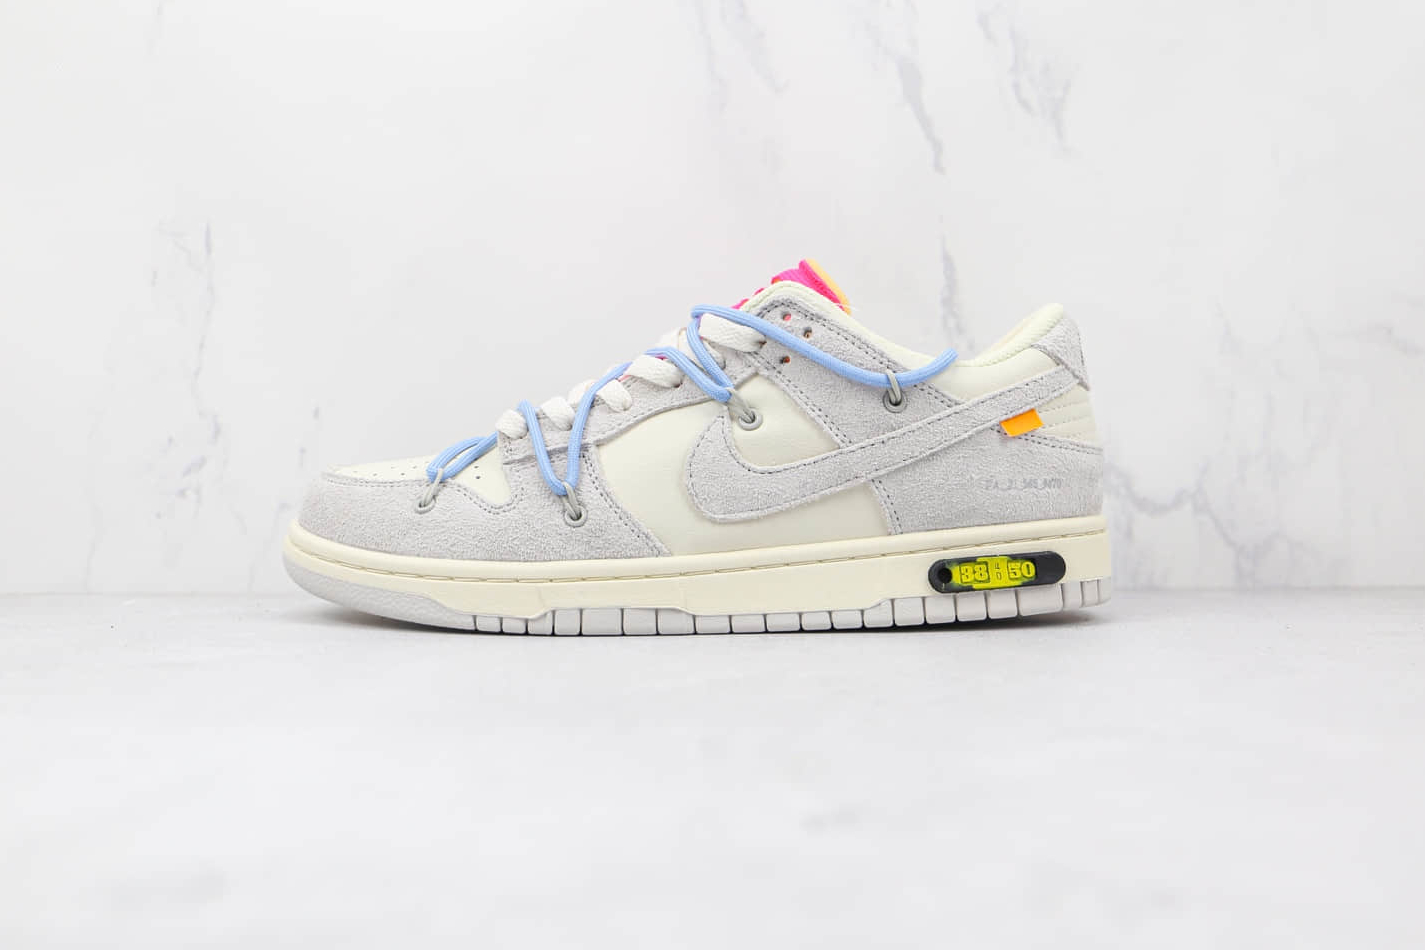 Nike Off-White Dunk Low 'Lot 38 of 50' DJ0950-113 - Limited Edition Collaboration